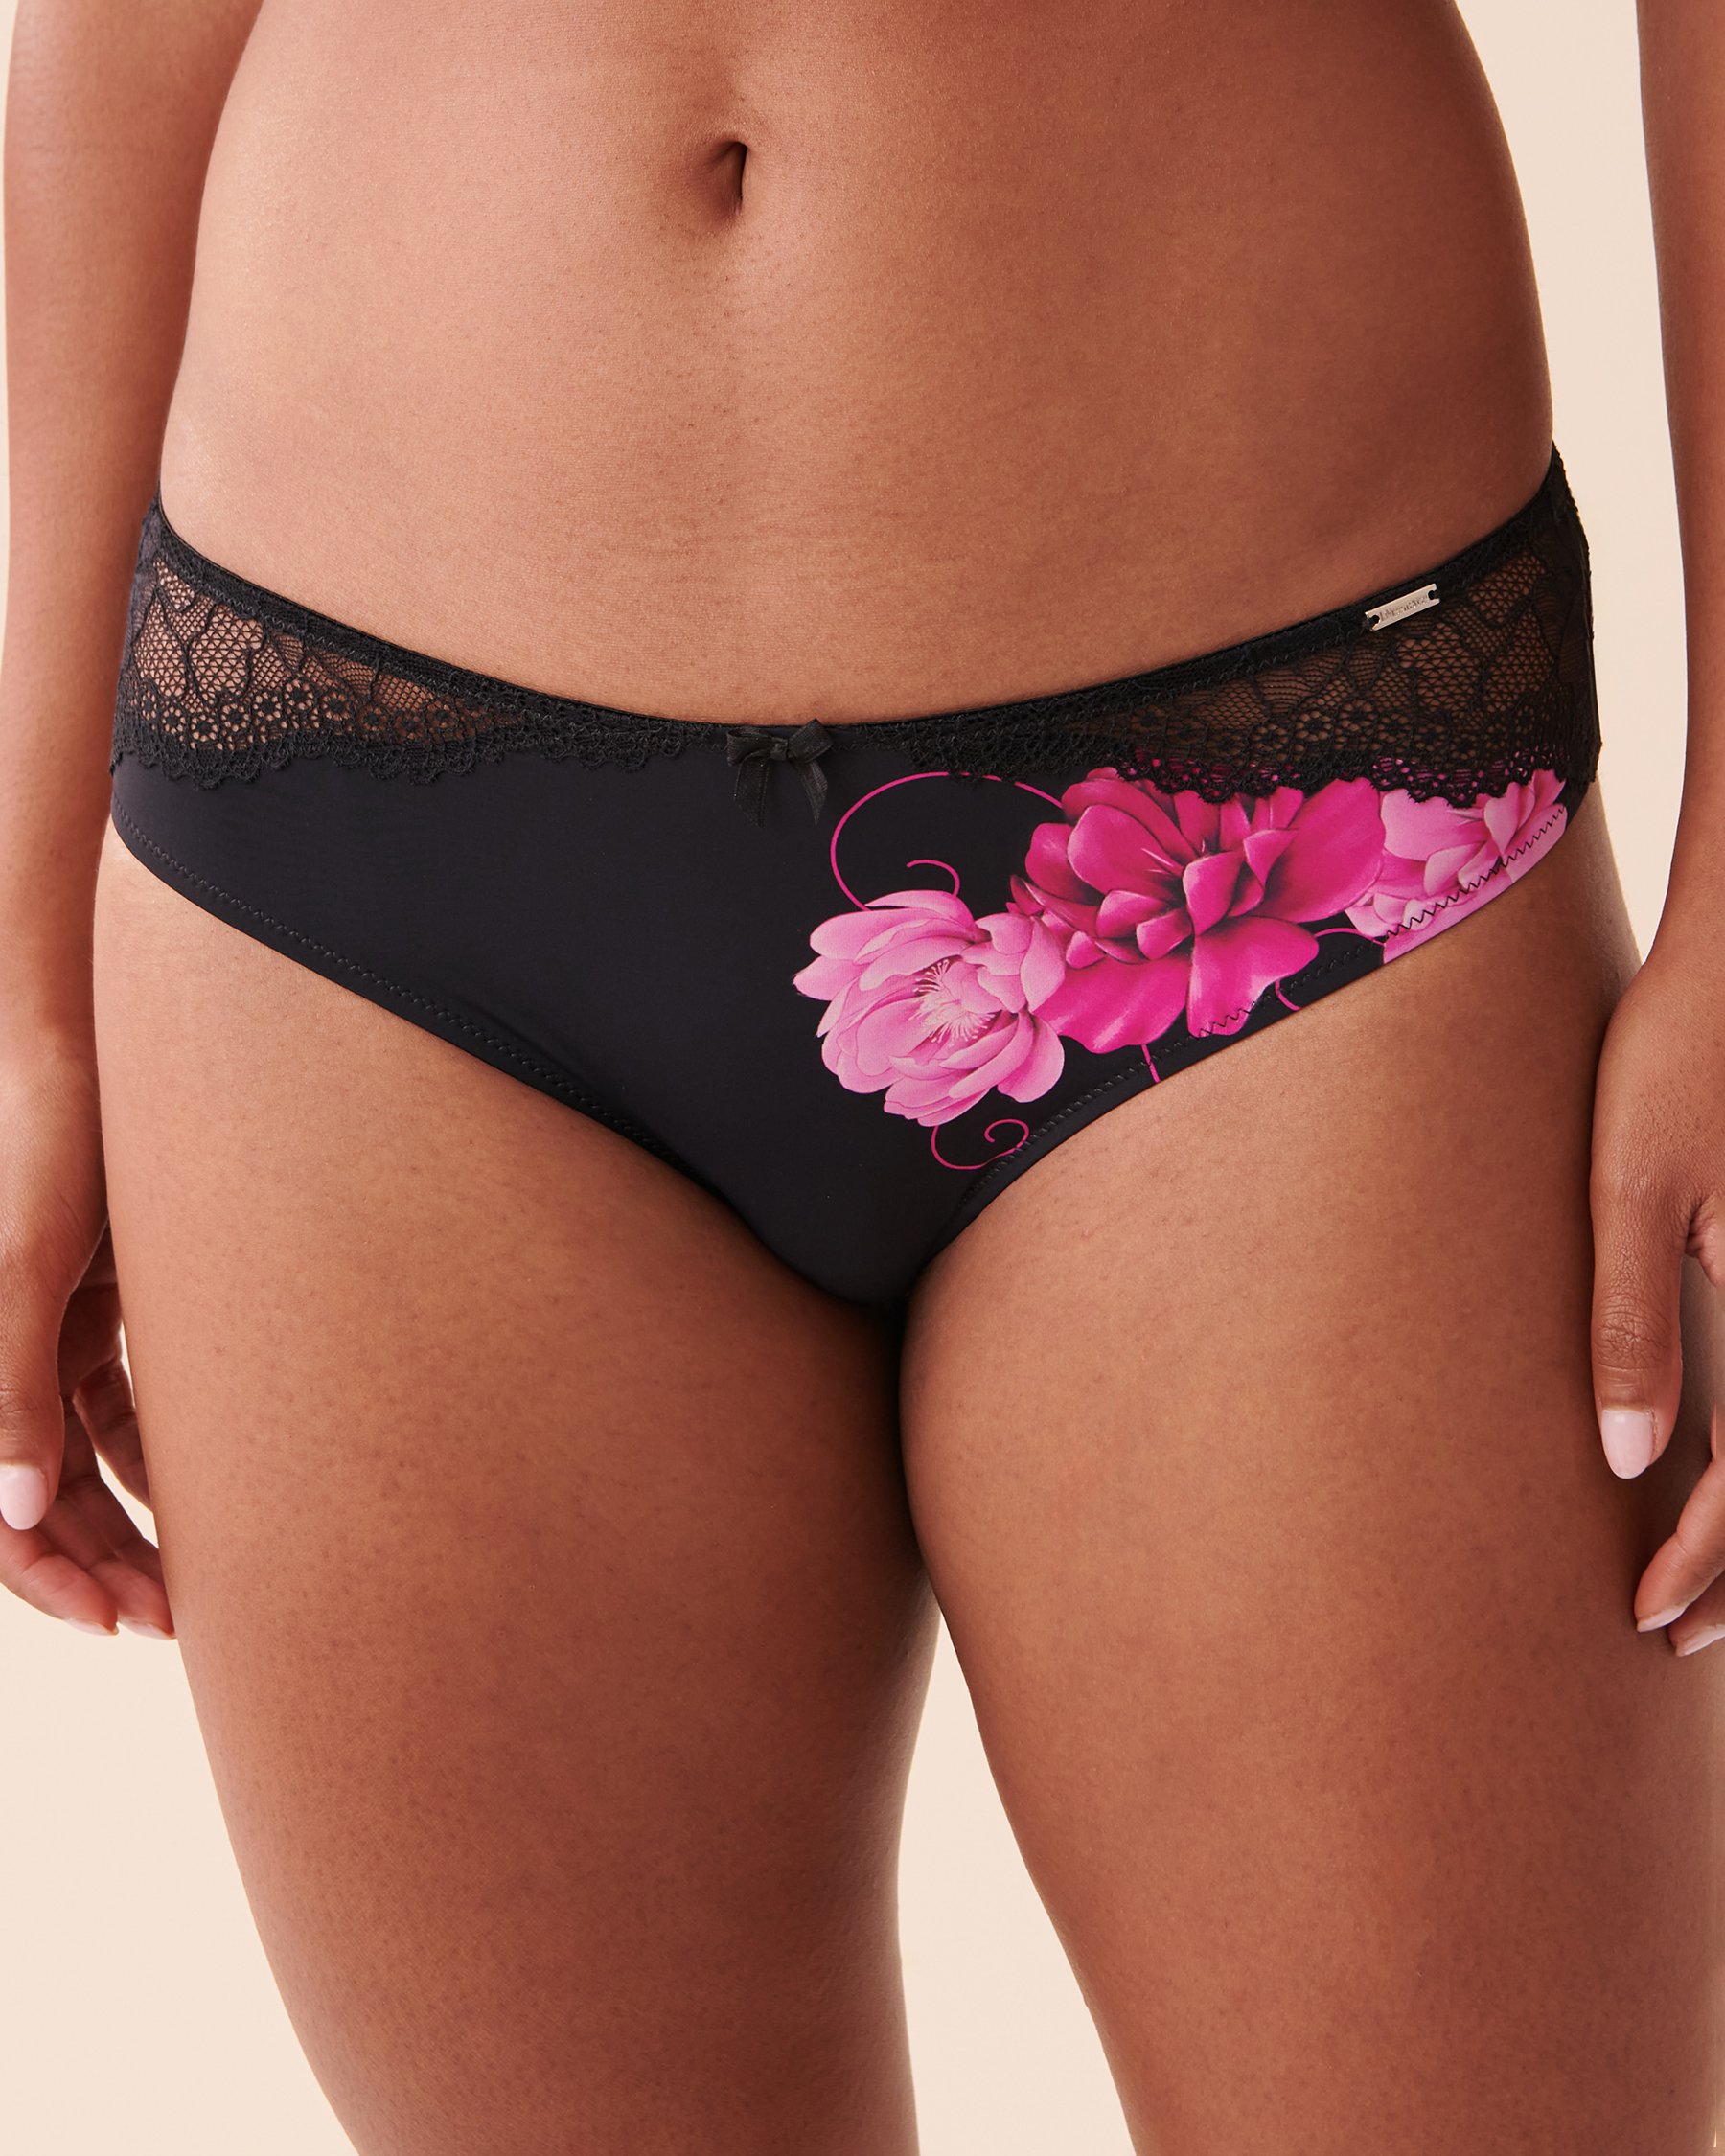 Embroidered Mesh Cheeky Panty - Pink Floral Embroidery